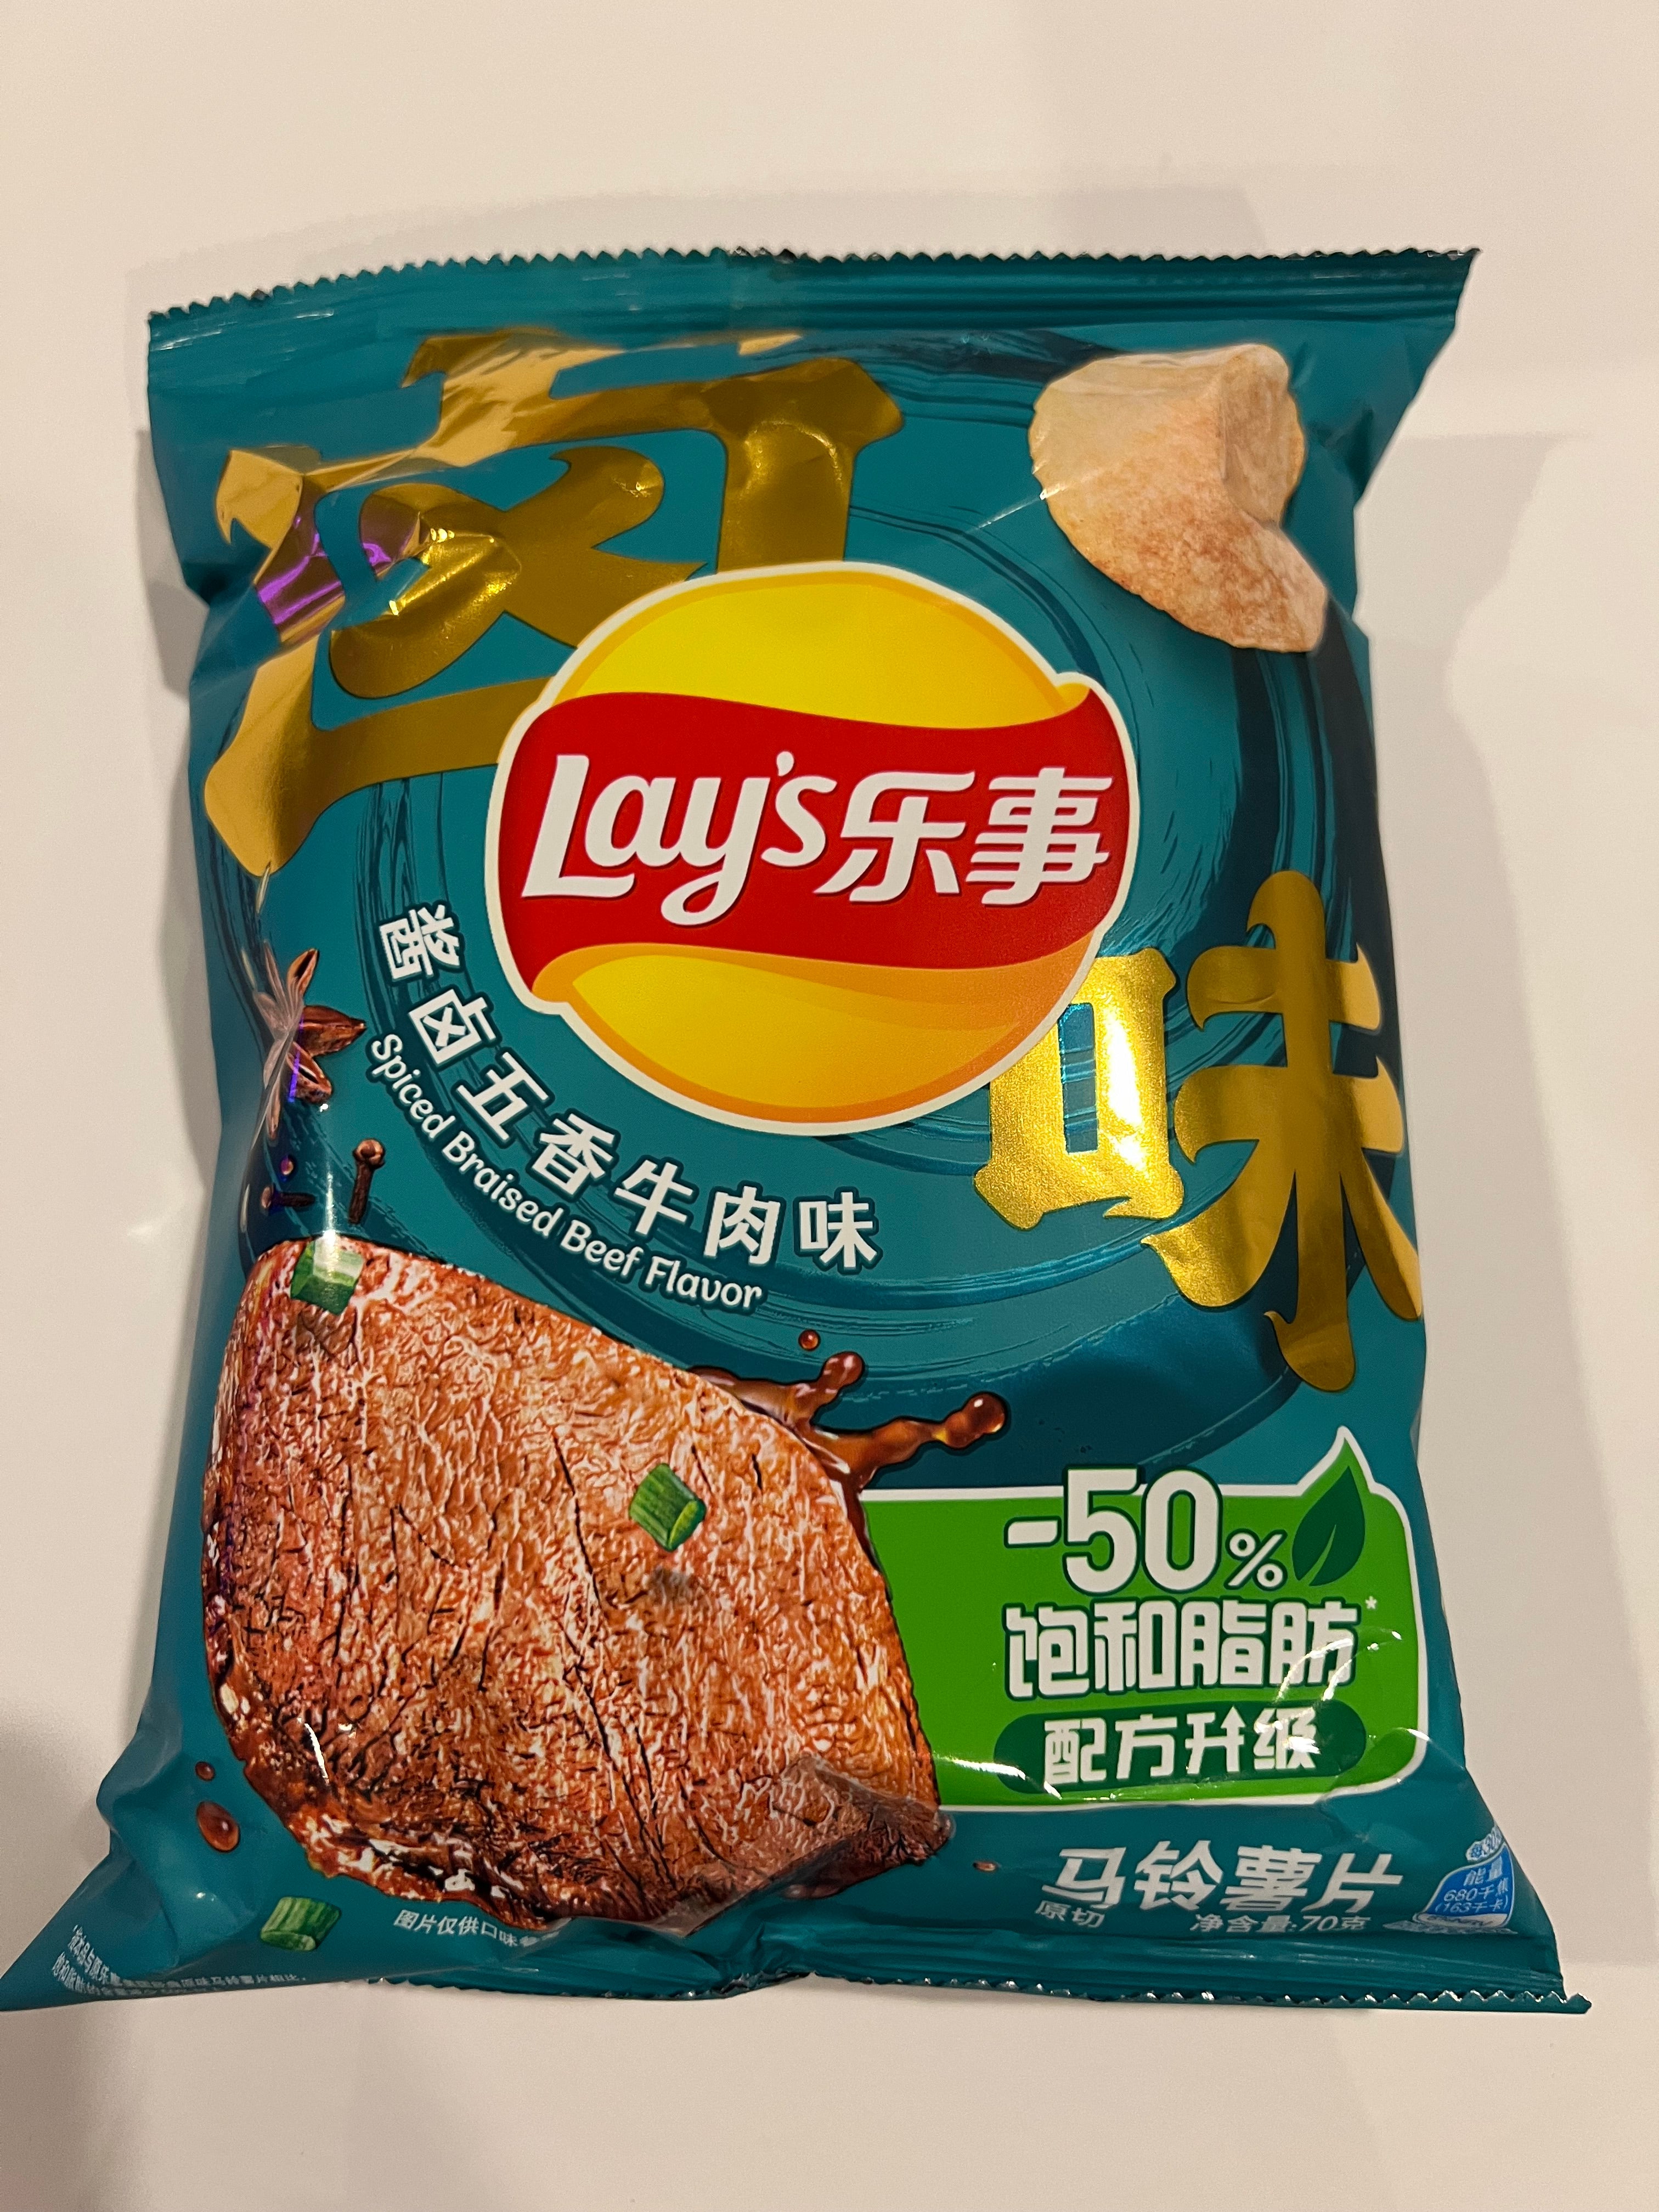 Lay's Spiced braised beef flavor